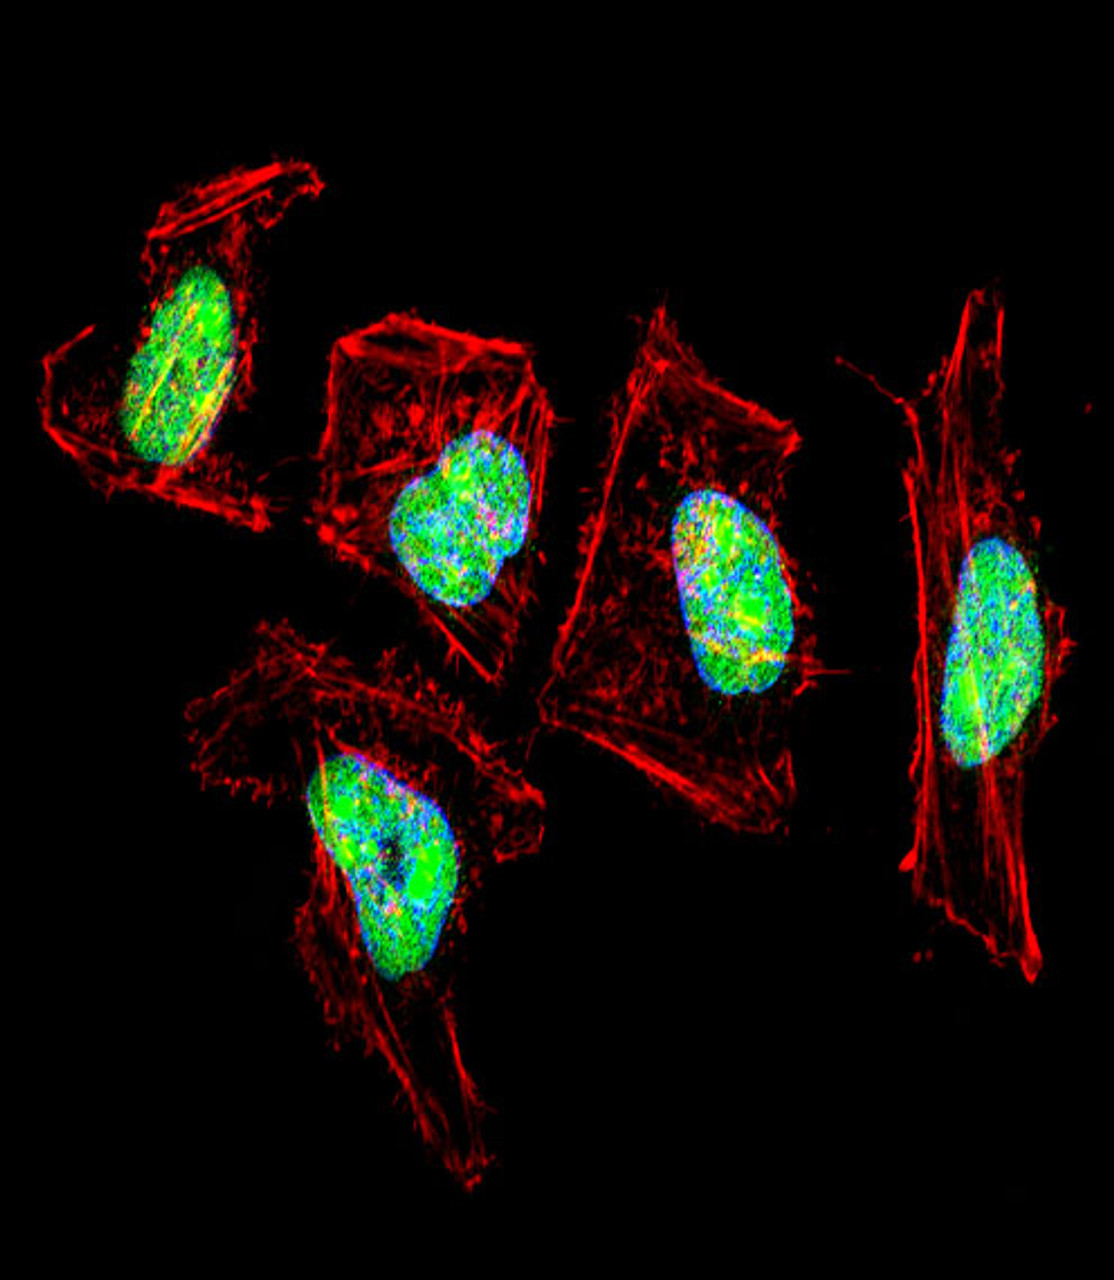 Fluorescent confocal image of Hela cell stained with NFIC Antibody . Hela cells were fixed with 4% PFA (20 min) , permeabilized with Triton X-100 (0.1%, 10 min) , then incubated with NFIC primary antibody (1:25) . For secondary antibody, Alexa Fluor 488 conjugated donkey anti-rabbit antibody (green) was used (1:400) .Cytoplasmic actin was counterstained with Alexa Fluor 555 (red) conjugated Phalloidin (7units/ml) . Nuclei were counterstained with DAPI (blue) (10 ug/ml, 10 min) . NFIC immunoreactivity is localized to nucleus significantly.